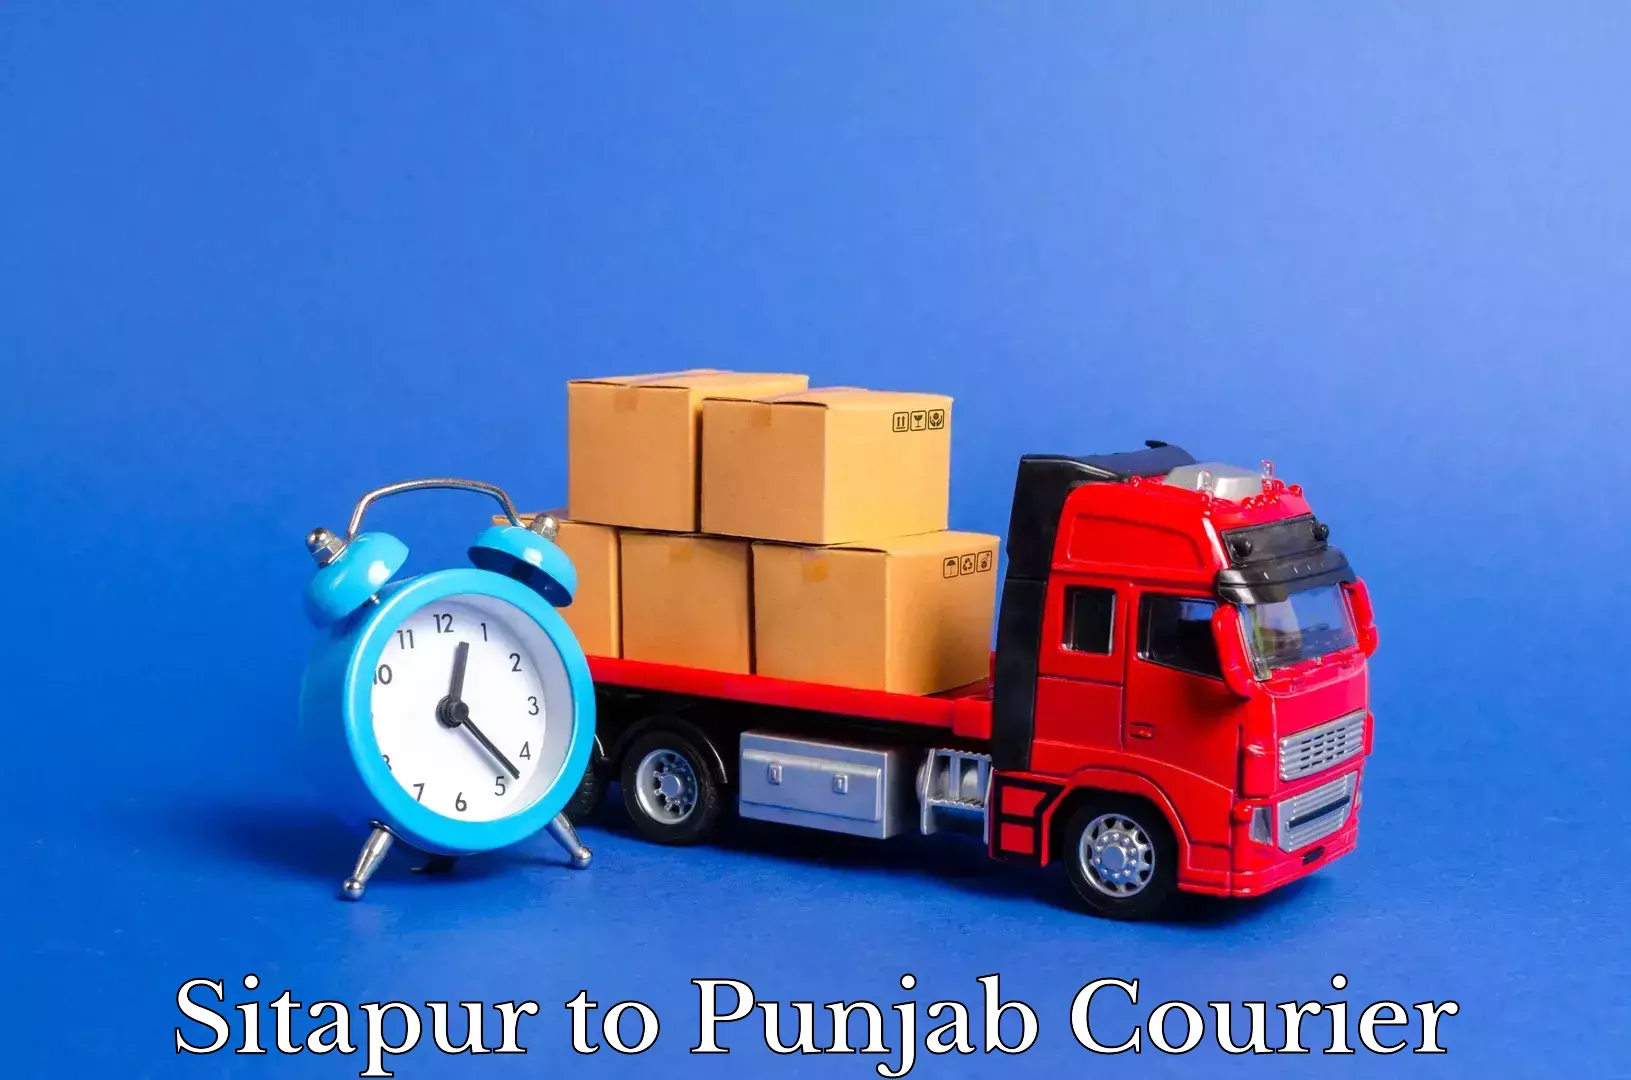 Professional packing and transport in Sitapur to Mohali